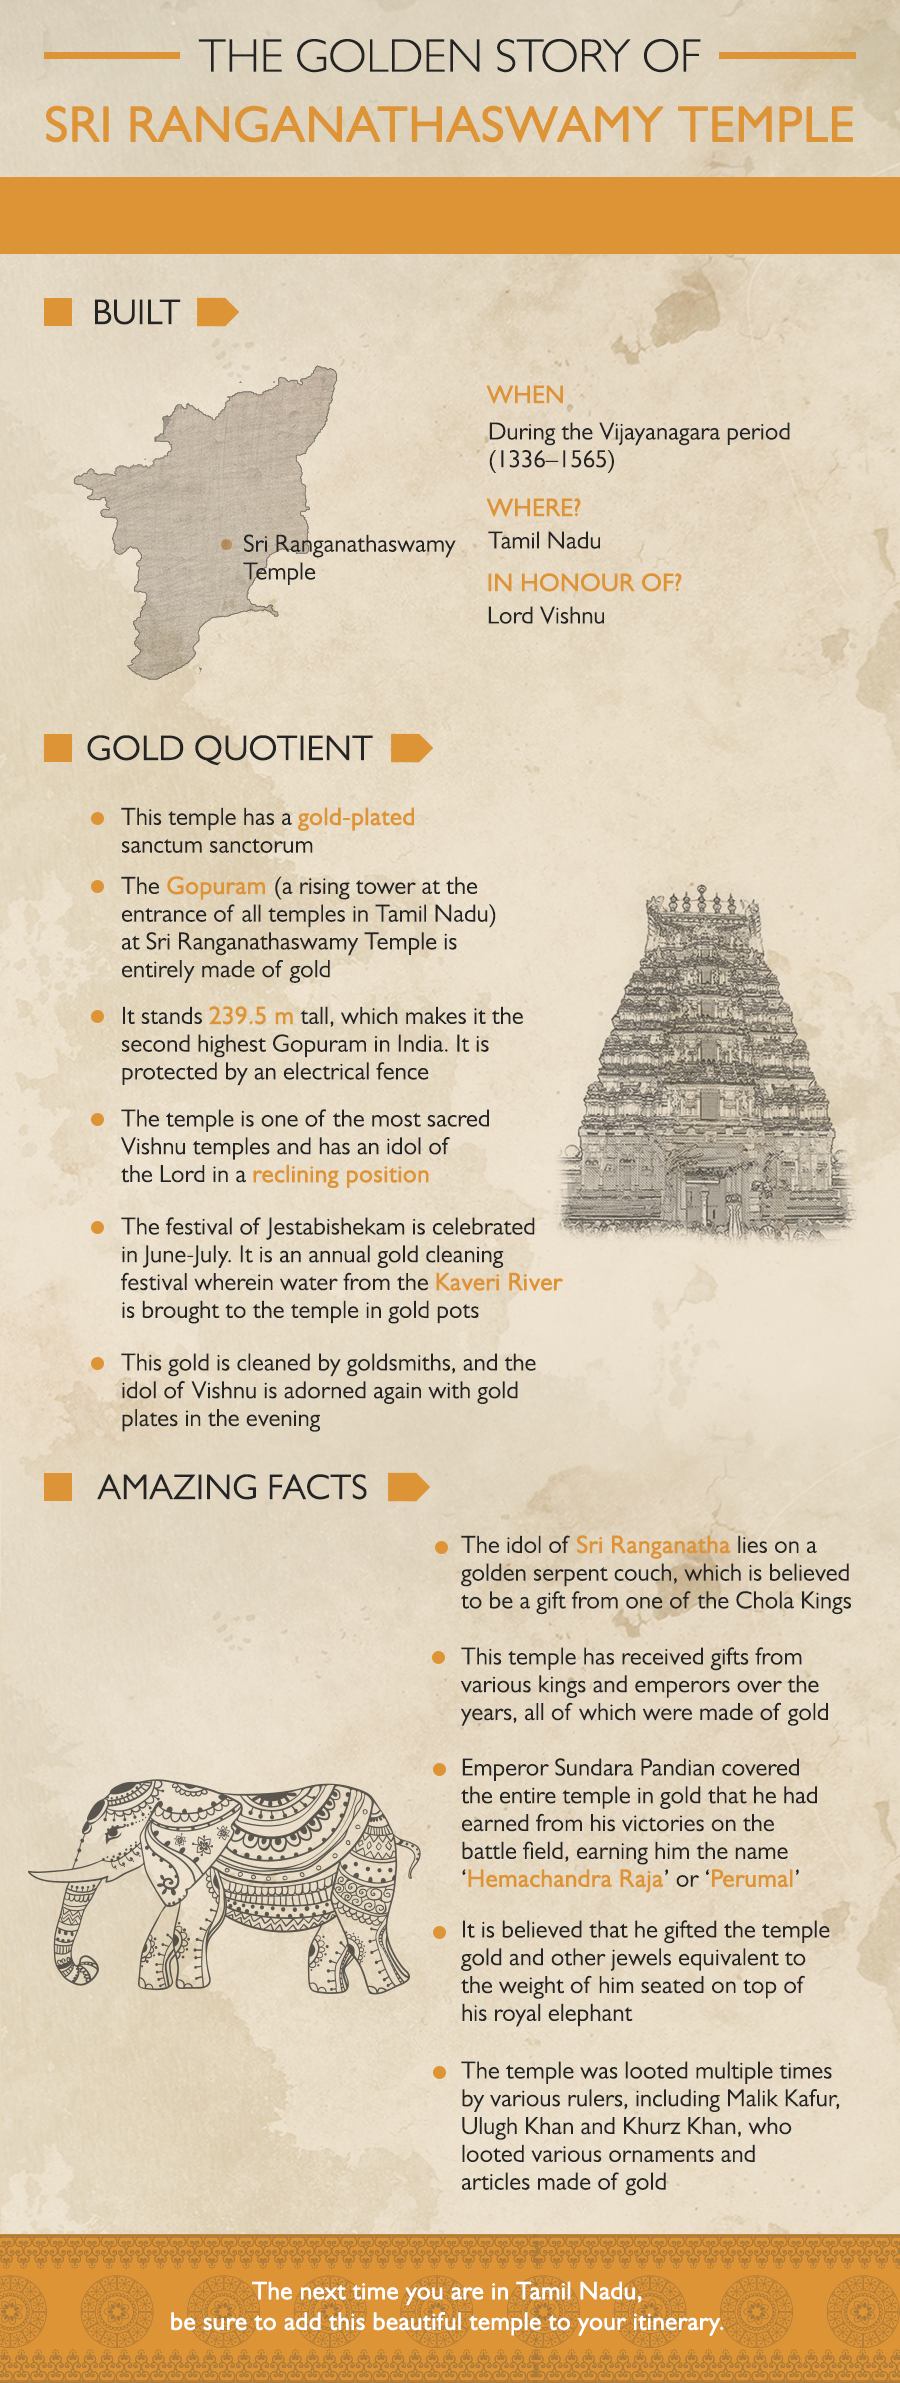 Sri Ranganathaswamy in Tamil Nadu has a gold-plated sanctum sanctorum and  2nd highest Gopuram in India. Take a look at various other amazing facts about this famous temple.